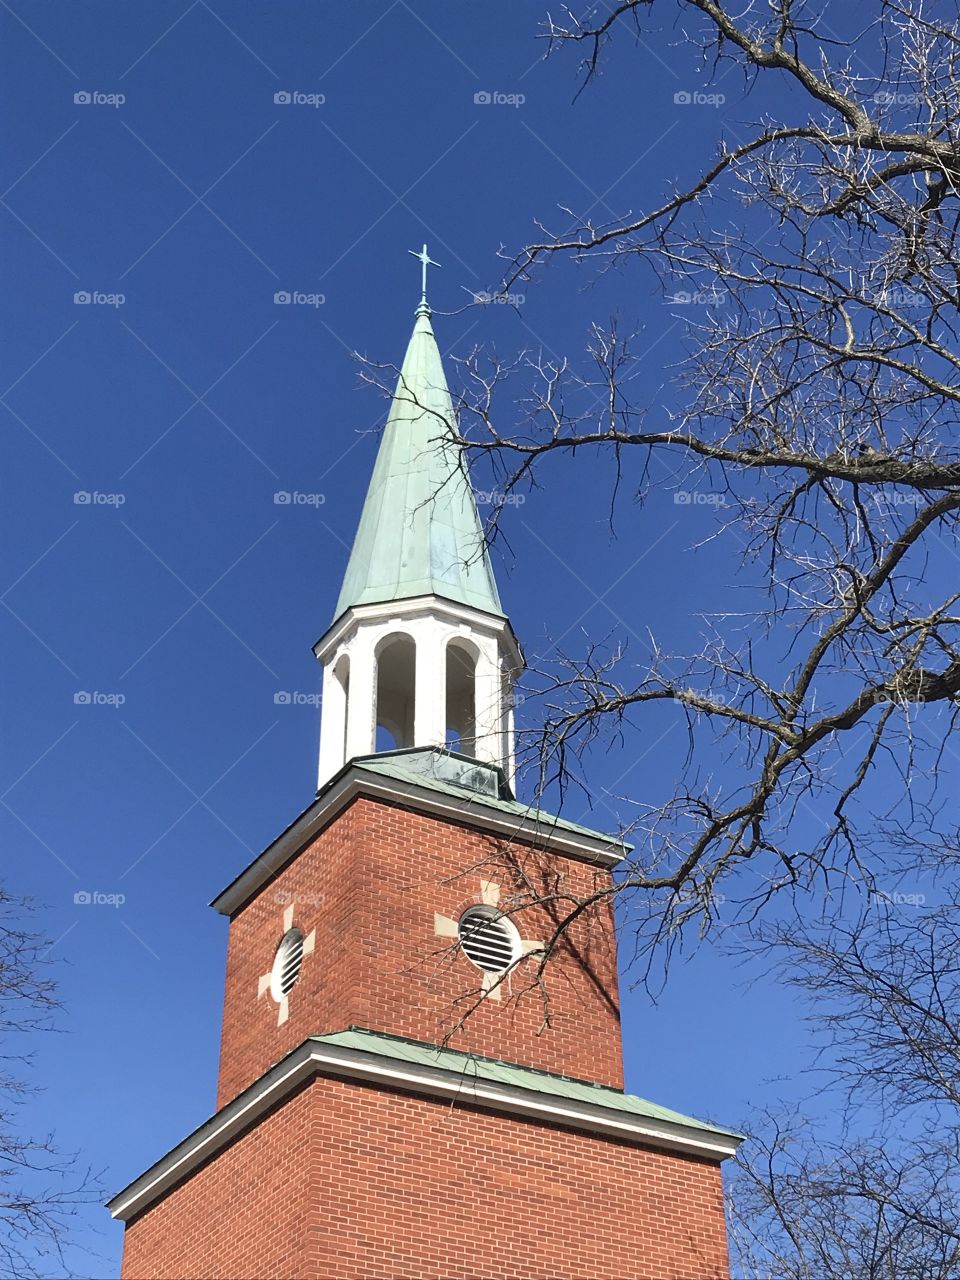 Church steeple bell tower & cross with blue sky and branches  